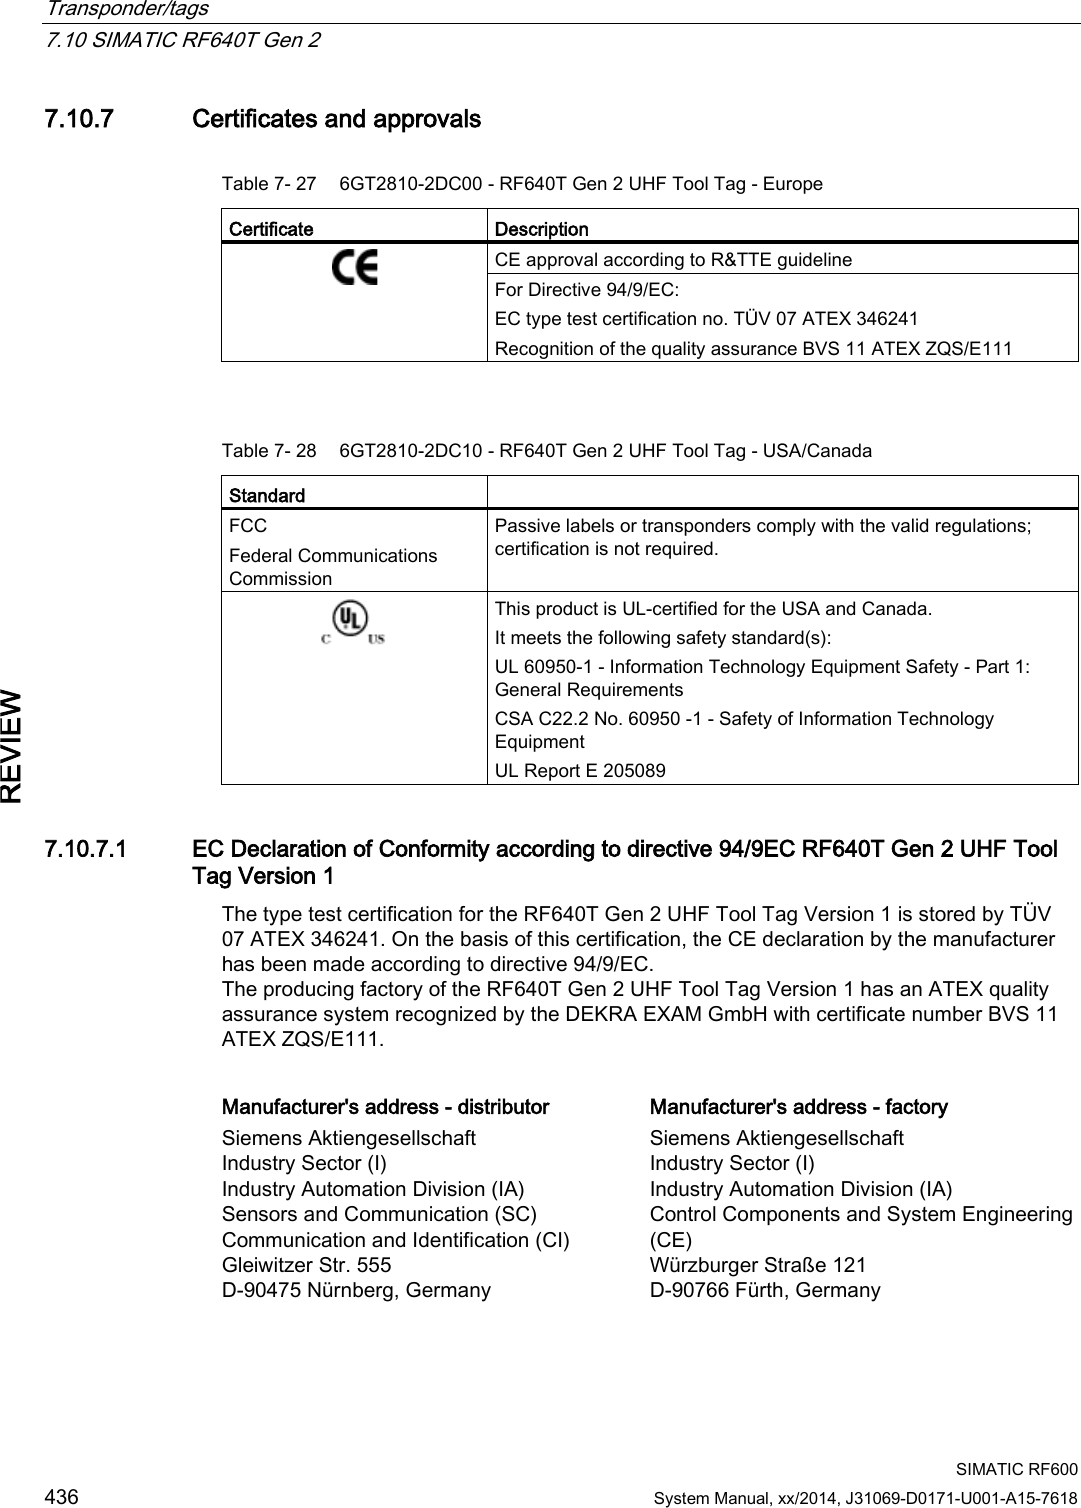 Transponder/tags   7.10 SIMATIC RF640T Gen 2  SIMATIC RF600 436 System Manual, xx/2014, J31069-D0171-U001-A15-7618 REVIEW 7.10.7 Certificates and approvals Table 7- 27 6GT2810-2DC00 - RF640T Gen 2 UHF Tool Tag - Europe Certificate Description  CE approval according to R&amp;TTE guideline For Directive 94/9/EC: EC type test certification no. TÜV 07 ATEX 346241 Recognition of the quality assurance BVS 11 ATEX ZQS/E111  Table 7- 28 6GT2810-2DC10 - RF640T Gen 2 UHF Tool Tag - USA/Canada Standard  FCC  Federal Communications Commission  Passive labels or transponders comply with the valid regulations; certification is not required.  This product is UL-certified for the USA and Canada. It meets the following safety standard(s):  UL 60950-1 - Information Technology Equipment Safety - Part 1: General Requirements CSA C22.2 No. 60950 -1 - Safety of Information Technology Equipment UL Report E 205089 7.10.7.1 EC Declaration of Conformity according to directive 94/9EC RF640T Gen 2 UHF Tool Tag Version 1 The type test certification for the RF640T Gen 2 UHF Tool Tag Version 1 is stored by TÜV 07 ATEX 346241. On the basis of this certification, the CE declaration by the manufacturer has been made according to directive 94/9/EC. The producing factory of the RF640T Gen 2 UHF Tool Tag Version 1 has an ATEX quality assurance system recognized by the DEKRA EXAM GmbH with certificate number BVS 11 ATEX ZQS/E111.  Manufacturer&apos;s address - distributor Manufacturer&apos;s address - factory Siemens Aktiengesellschaft Industry Sector (I) Industry Automation Division (IA) Sensors and Communication (SC) Communication and Identification (CI) Gleiwitzer Str. 555 D-90475 Nürnberg, Germany Siemens Aktiengesellschaft Industry Sector (I) Industry Automation Division (IA) Control Components and System Engineering (CE) Würzburger Straße 121 D-90766 Fürth, Germany 